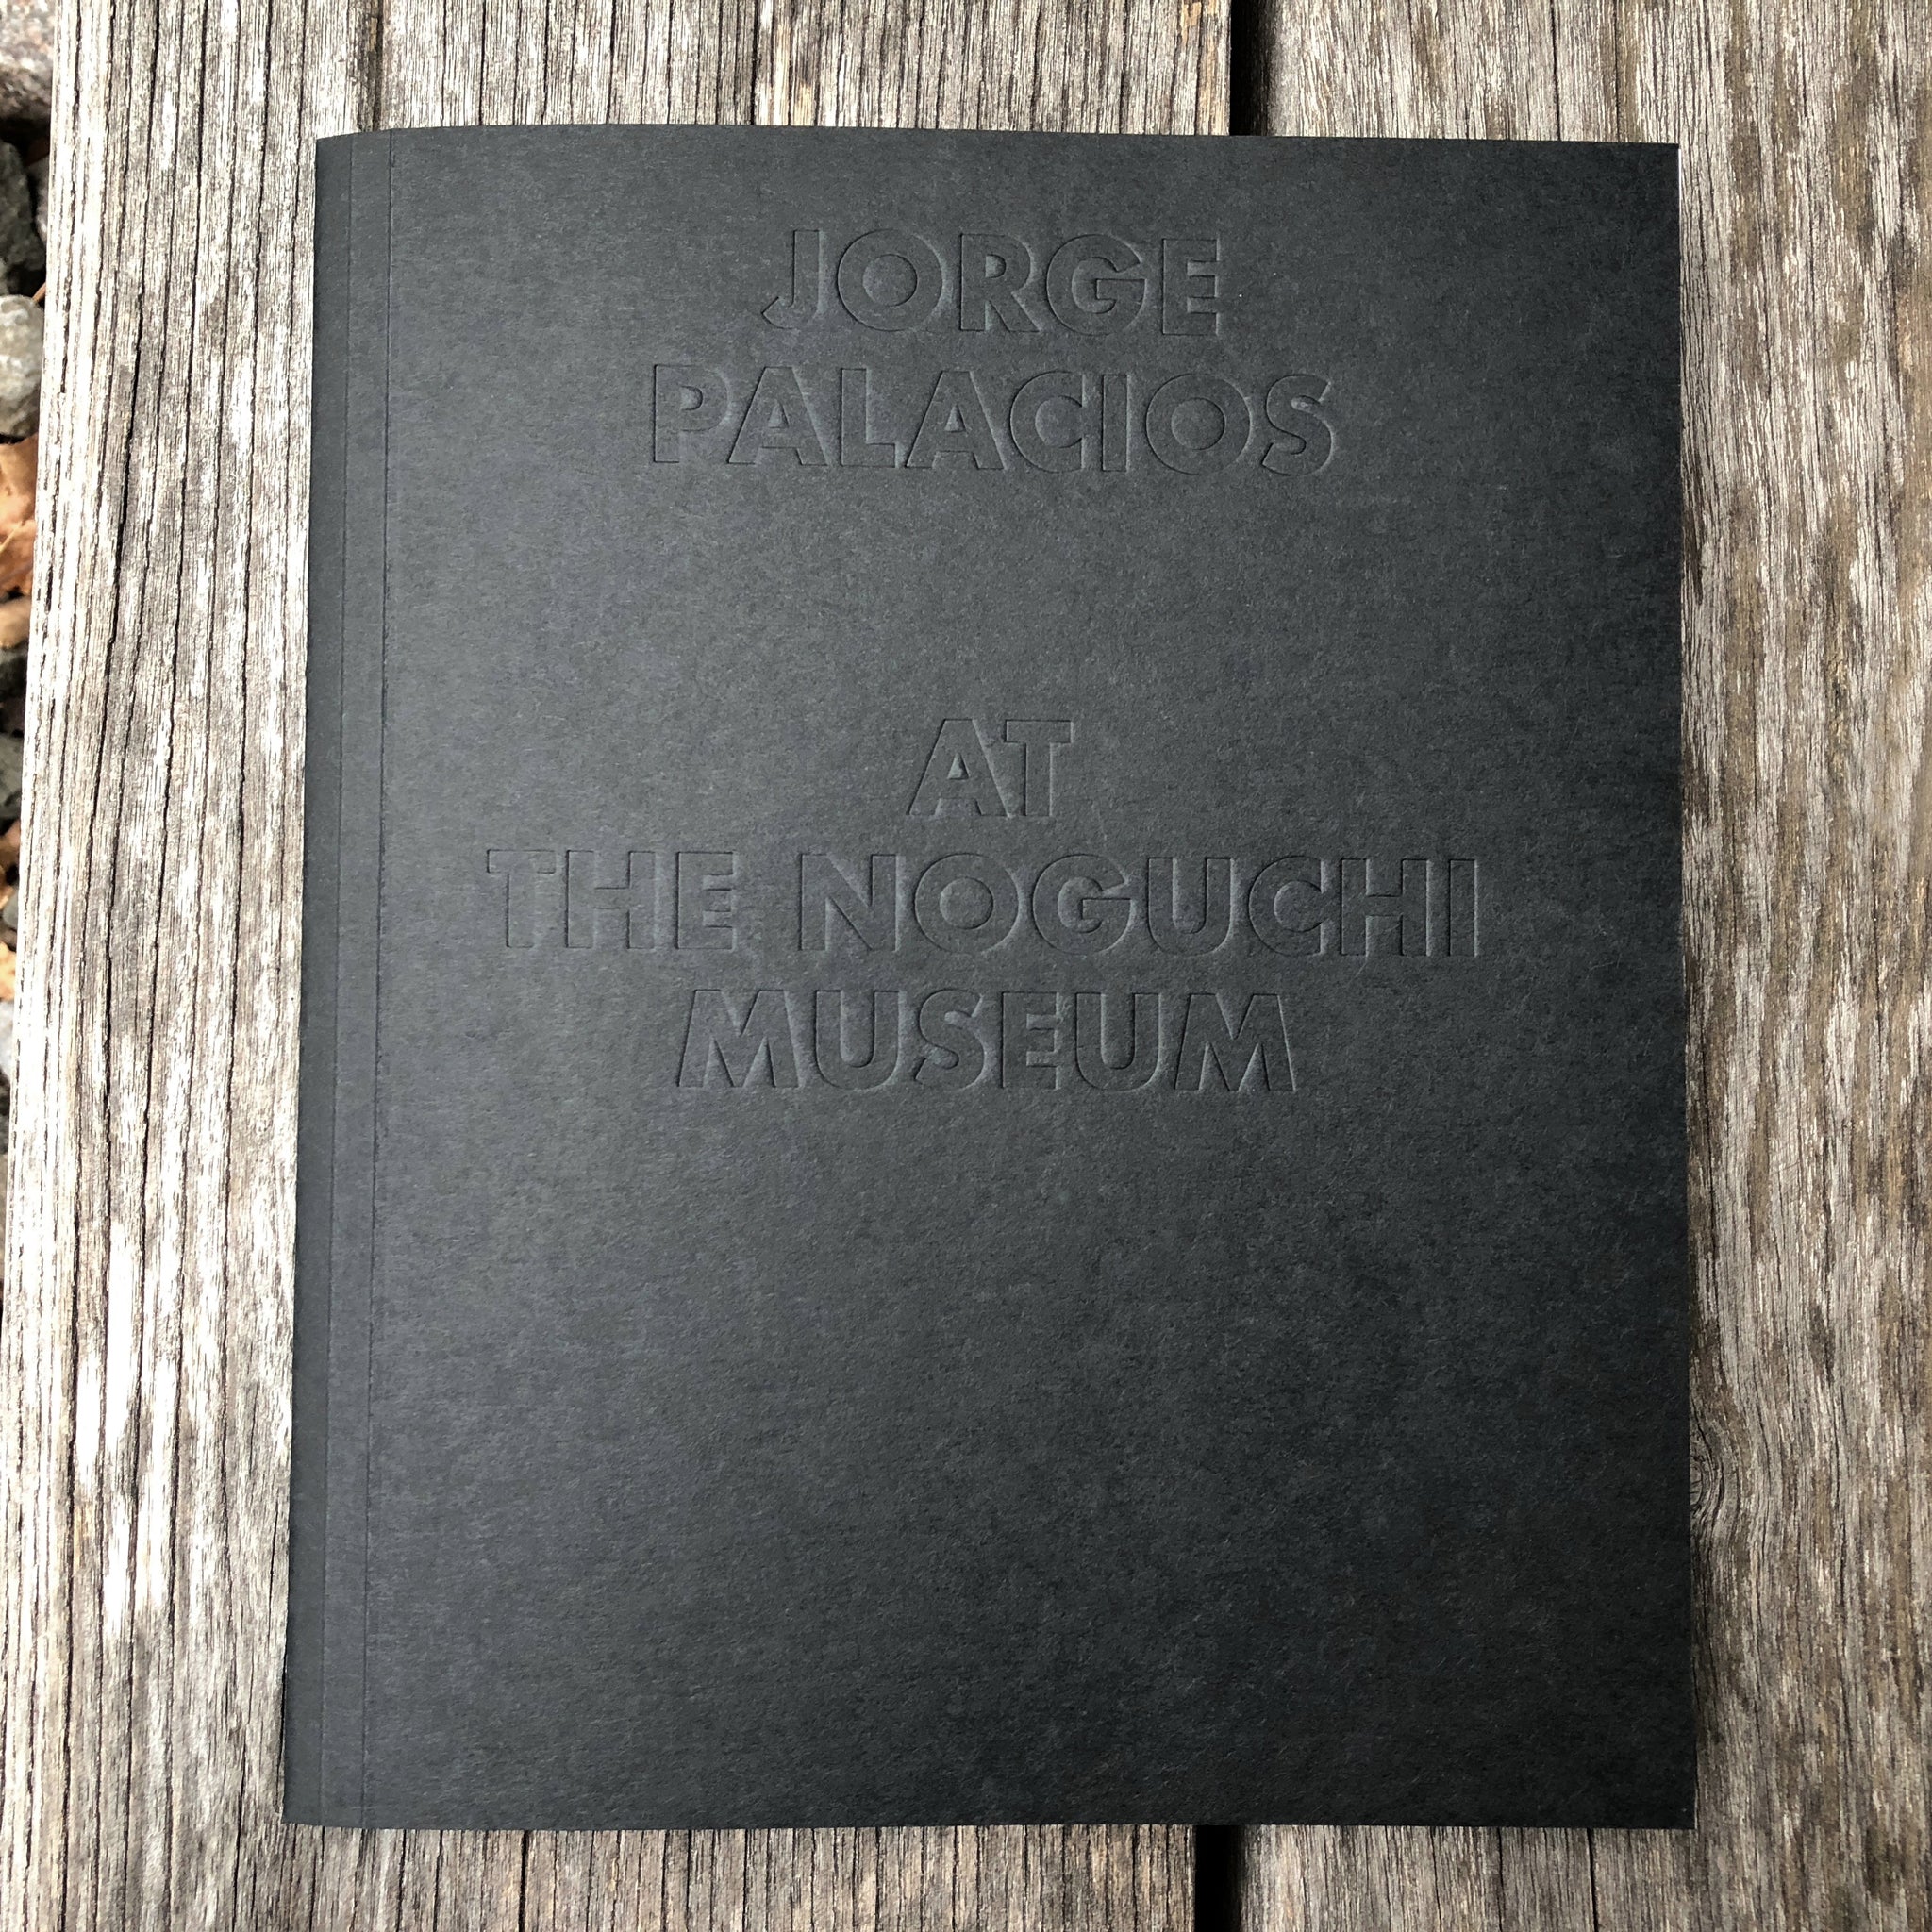 'Jorge Palacios at The Noguchi Museum' cover. Black paper cover with blind-stamped sans serif type.